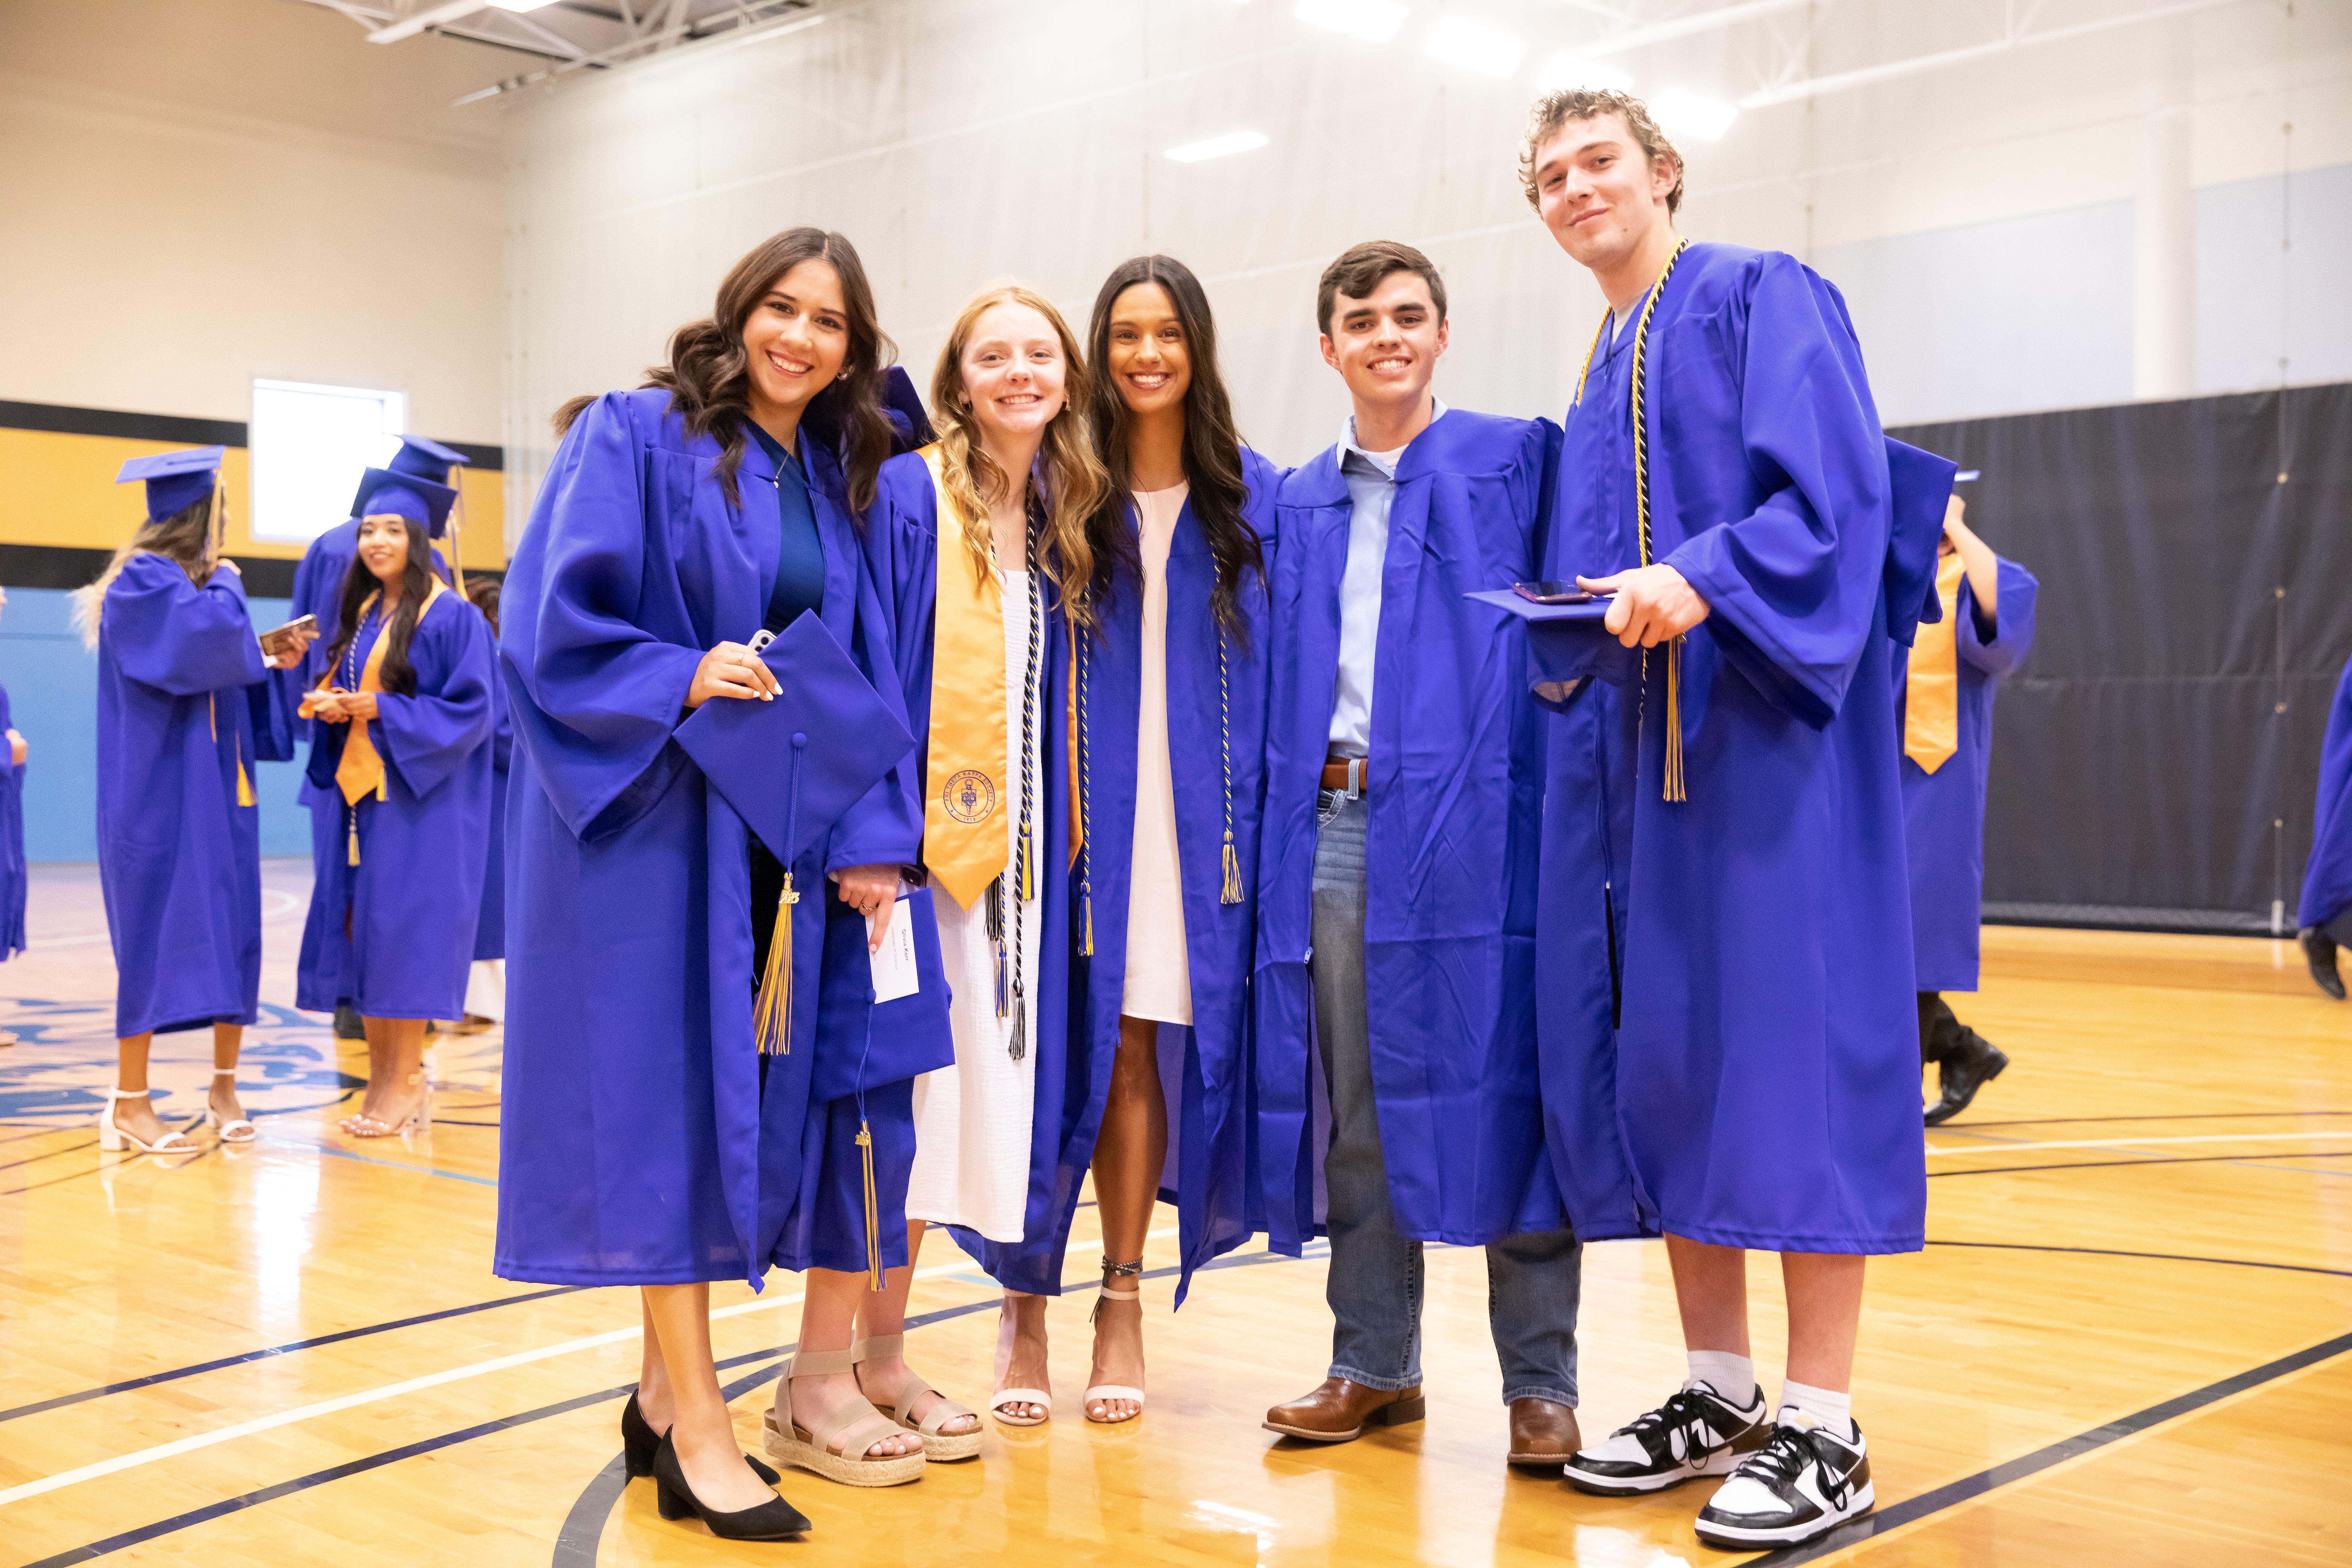 Students pause for a photo before the 2023 commencement ceremony in the Barton Gym.